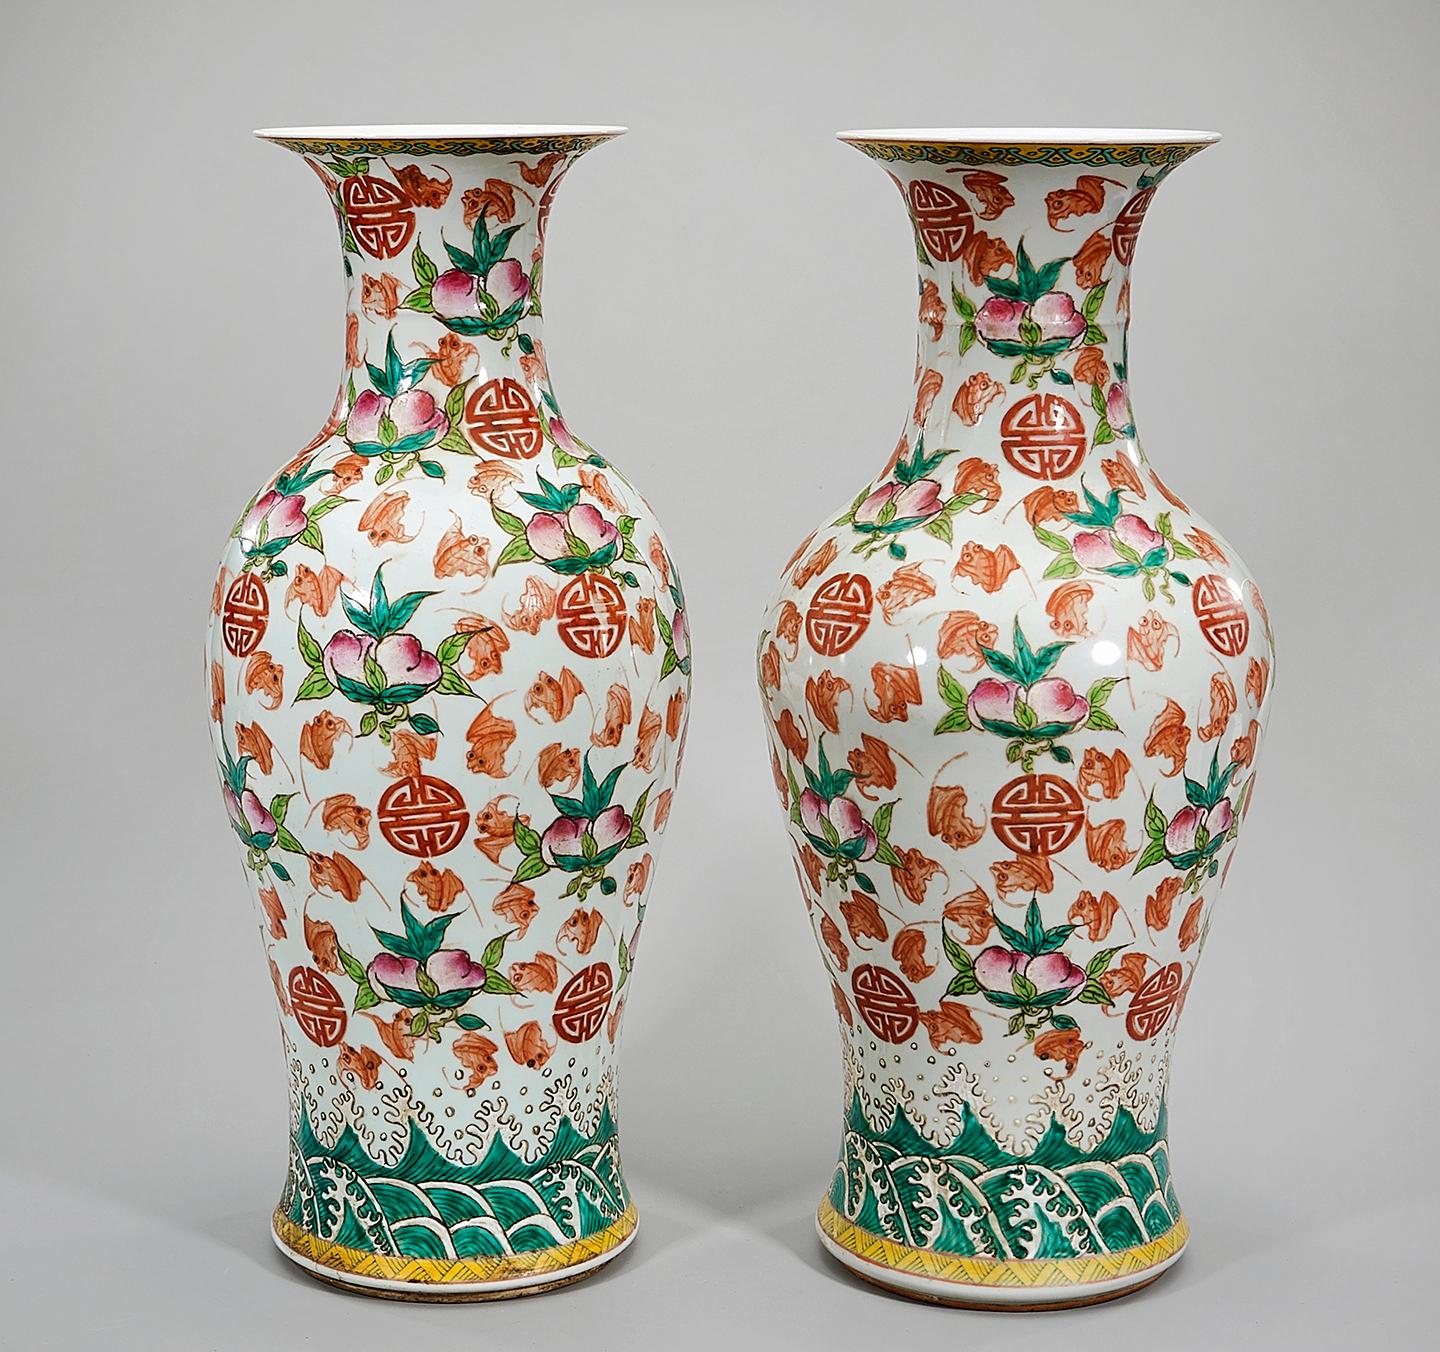 Lovely Pair of Chinese polychrome enameled procelain vases decorated in a foliate and peach motif. 
Shou characters throughout the vase. 
Bearing an under glazed six character markings on the bottom

Measures: H. 23